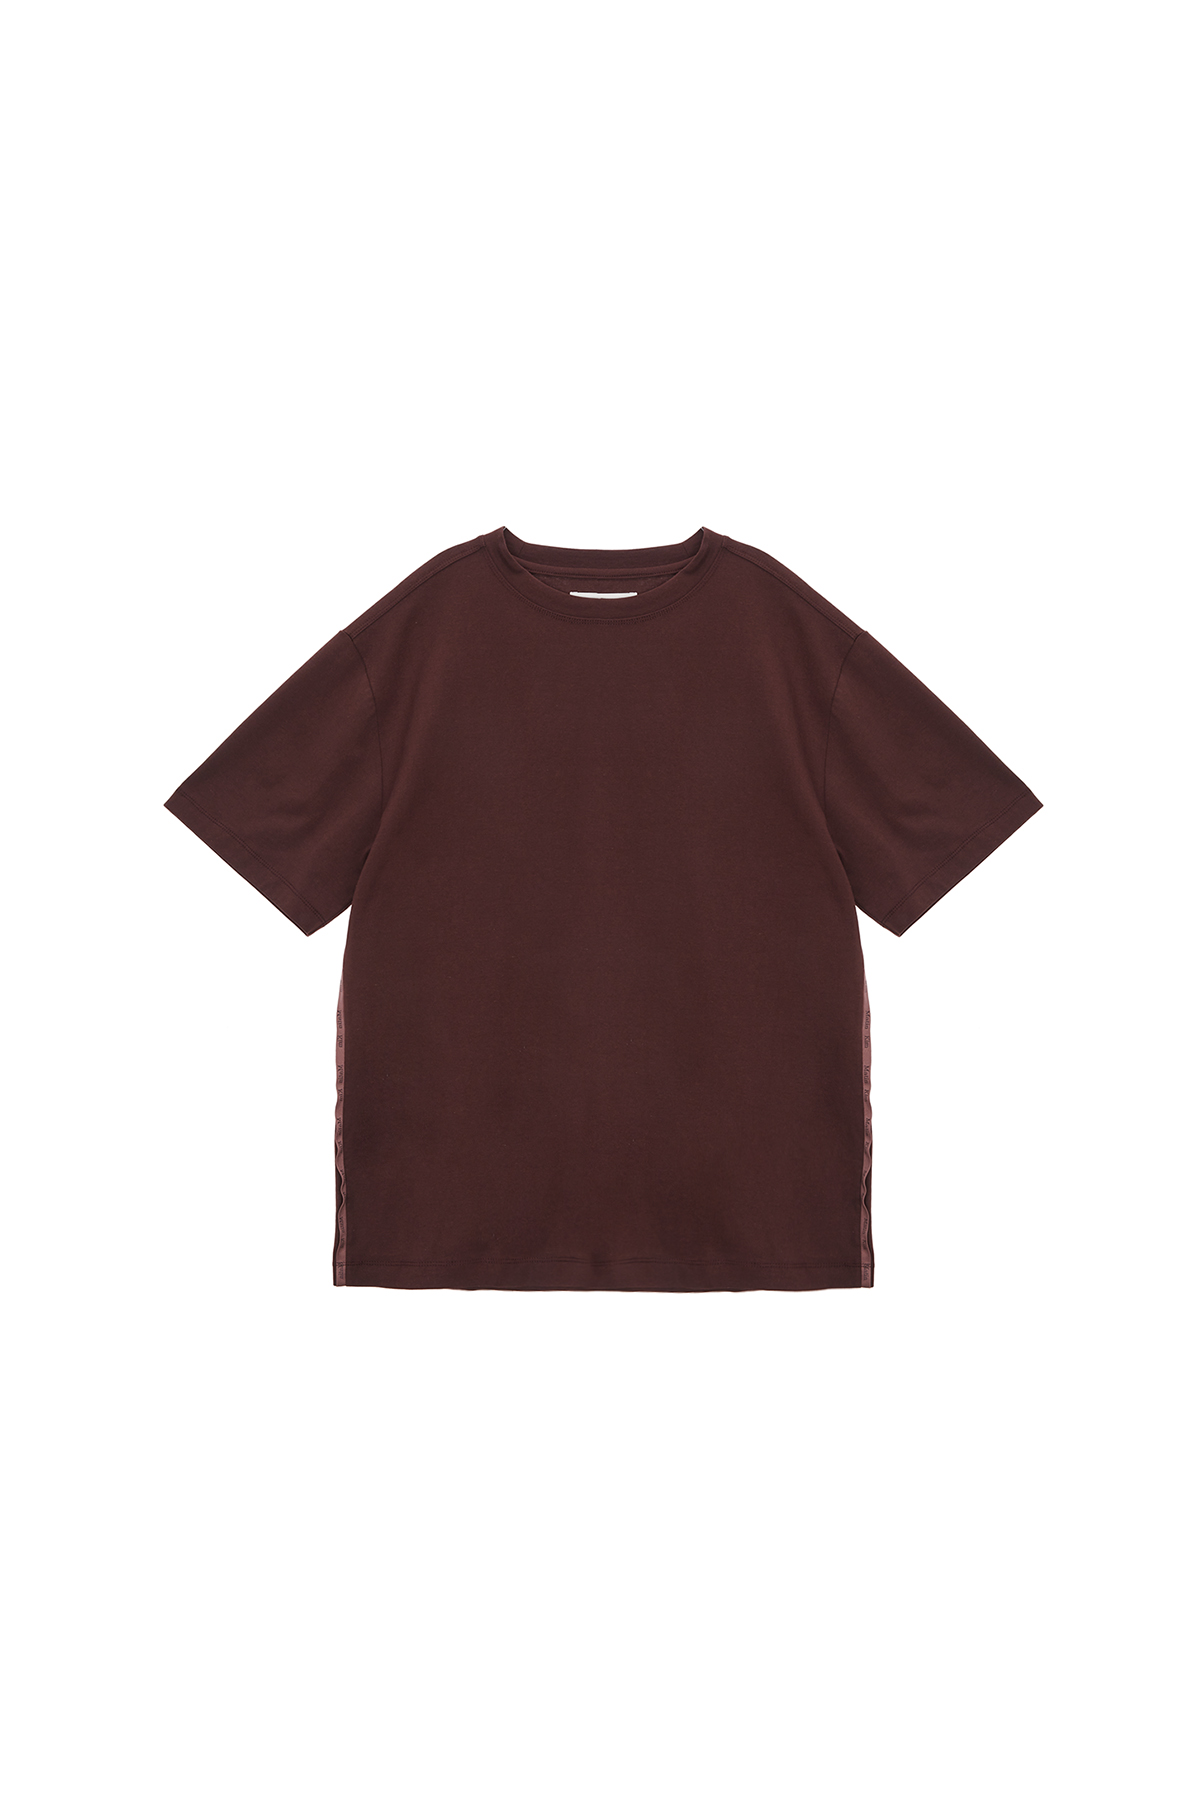 SIDE LOGO TAPING BOXY TOP IN BROWN